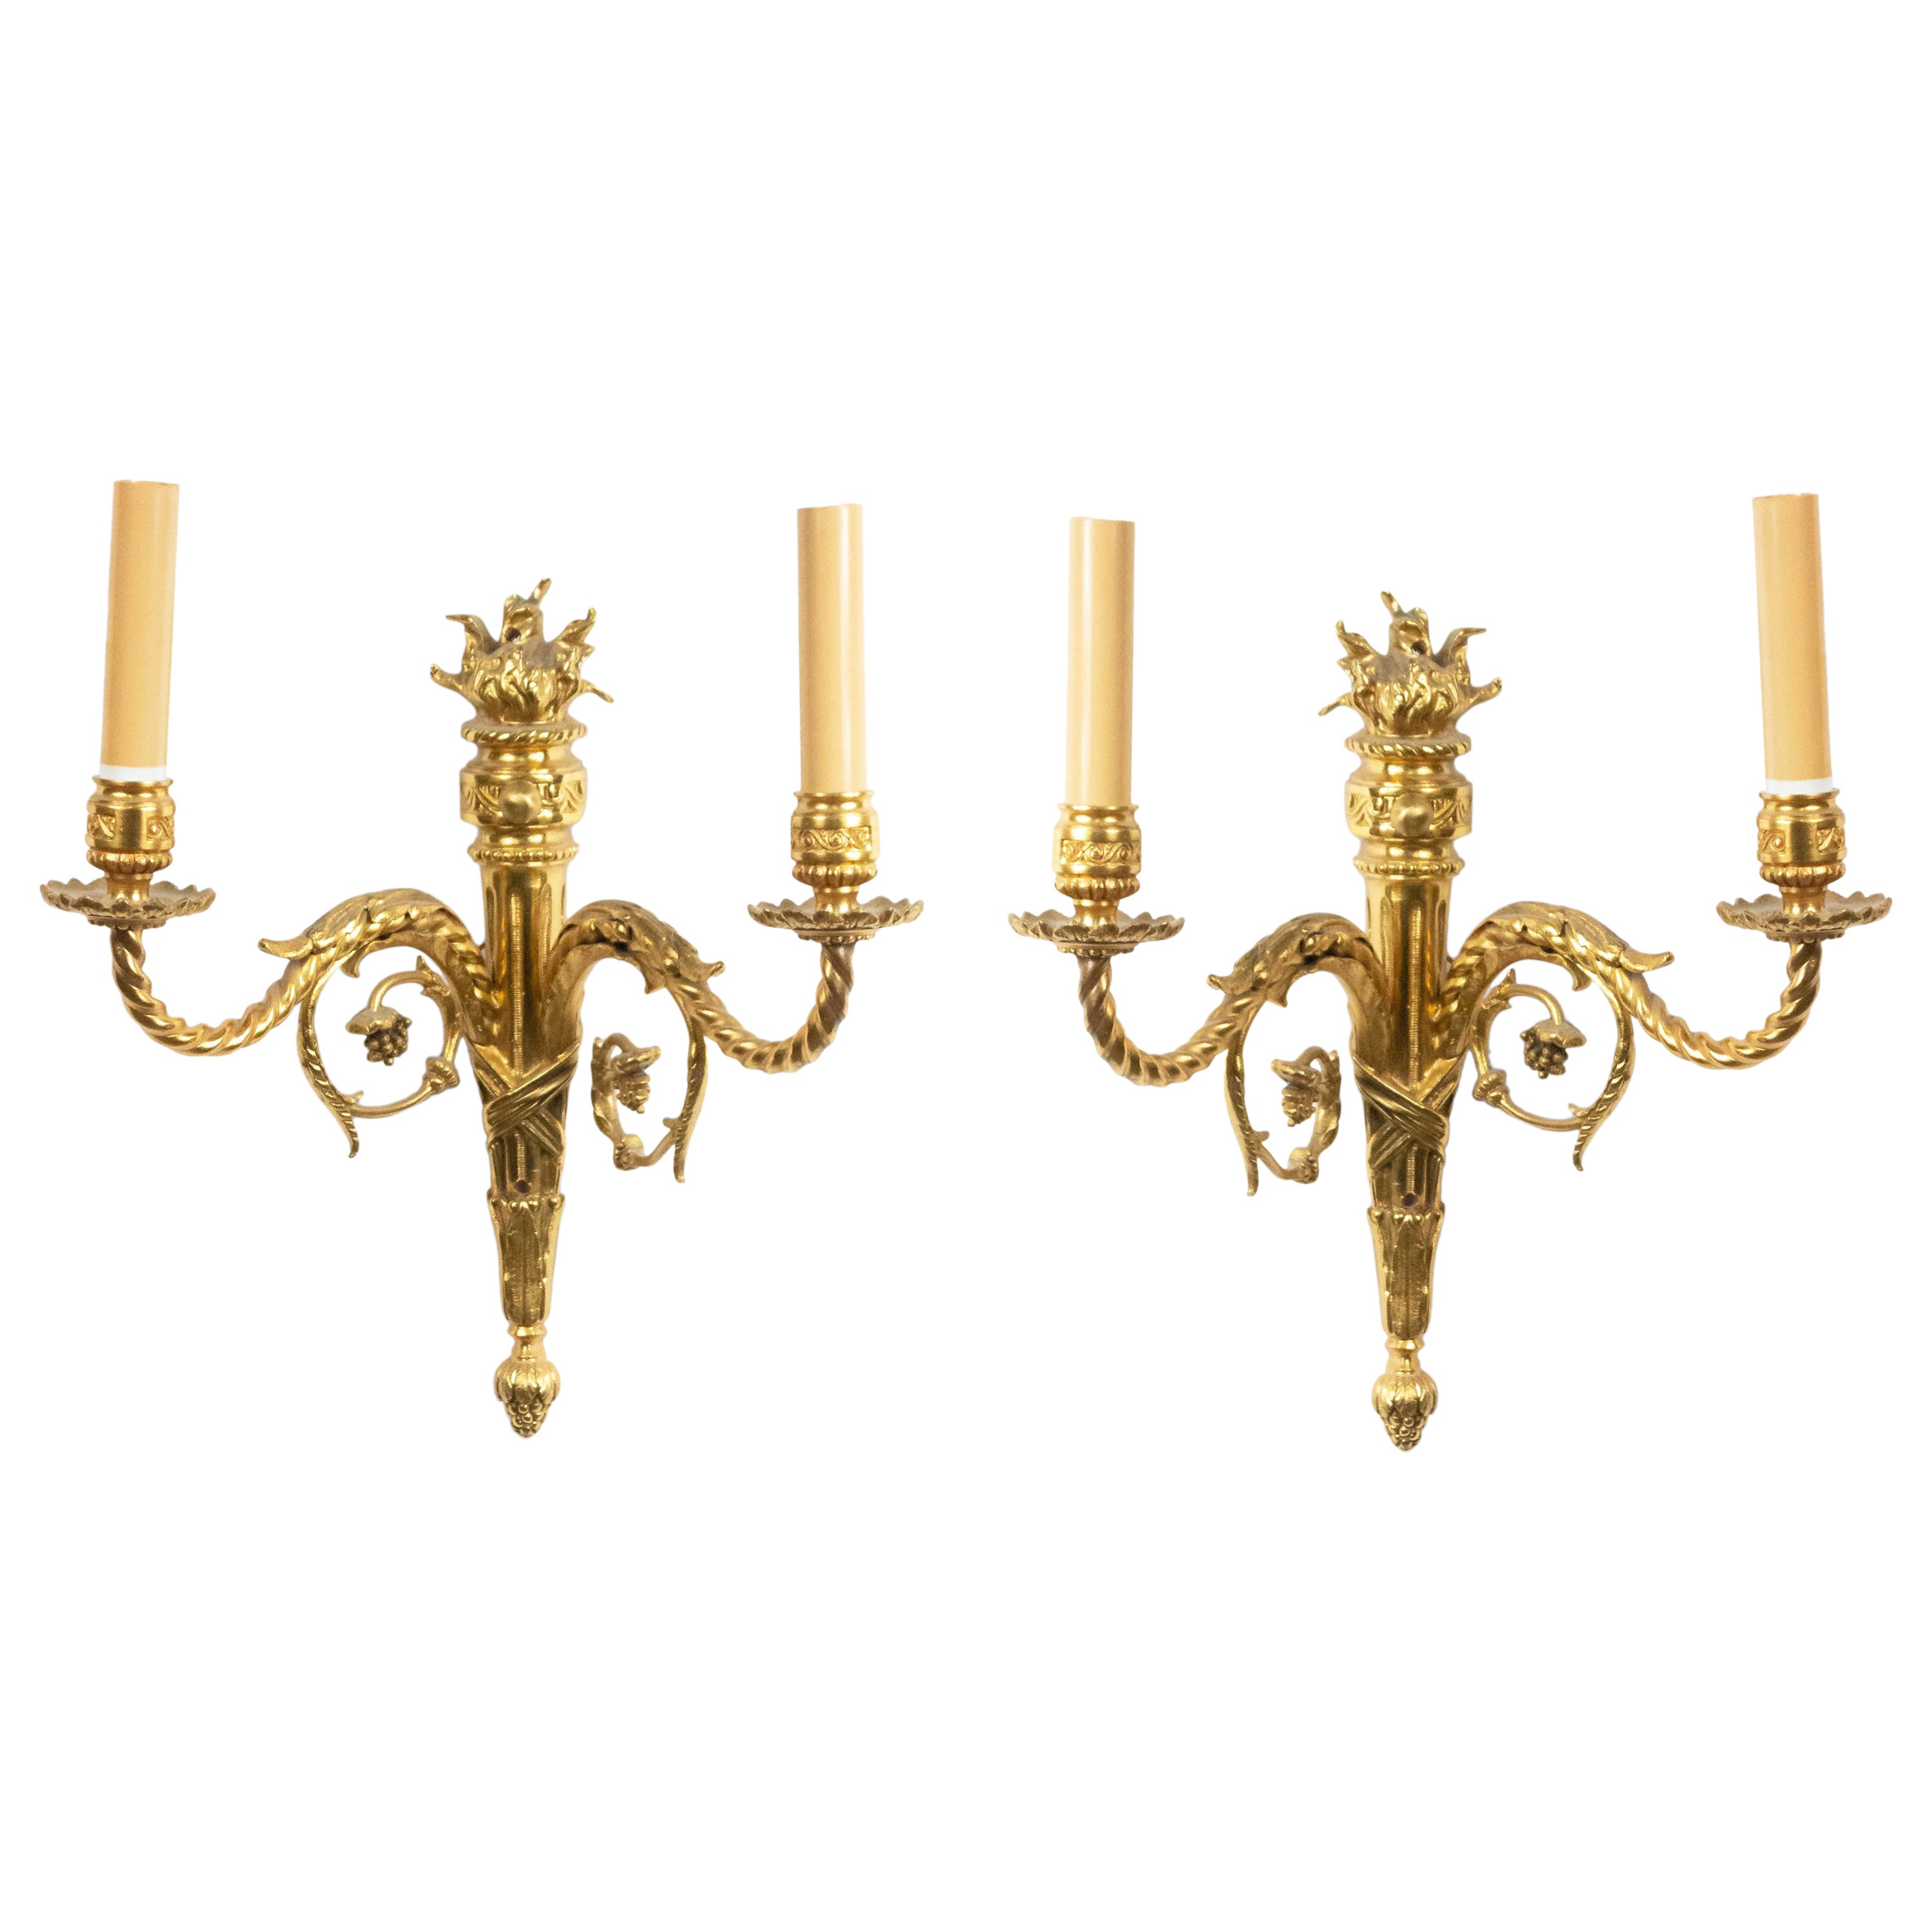 Pair of French Louis XVI Style Bronze Dore Wall Sconces For Sale